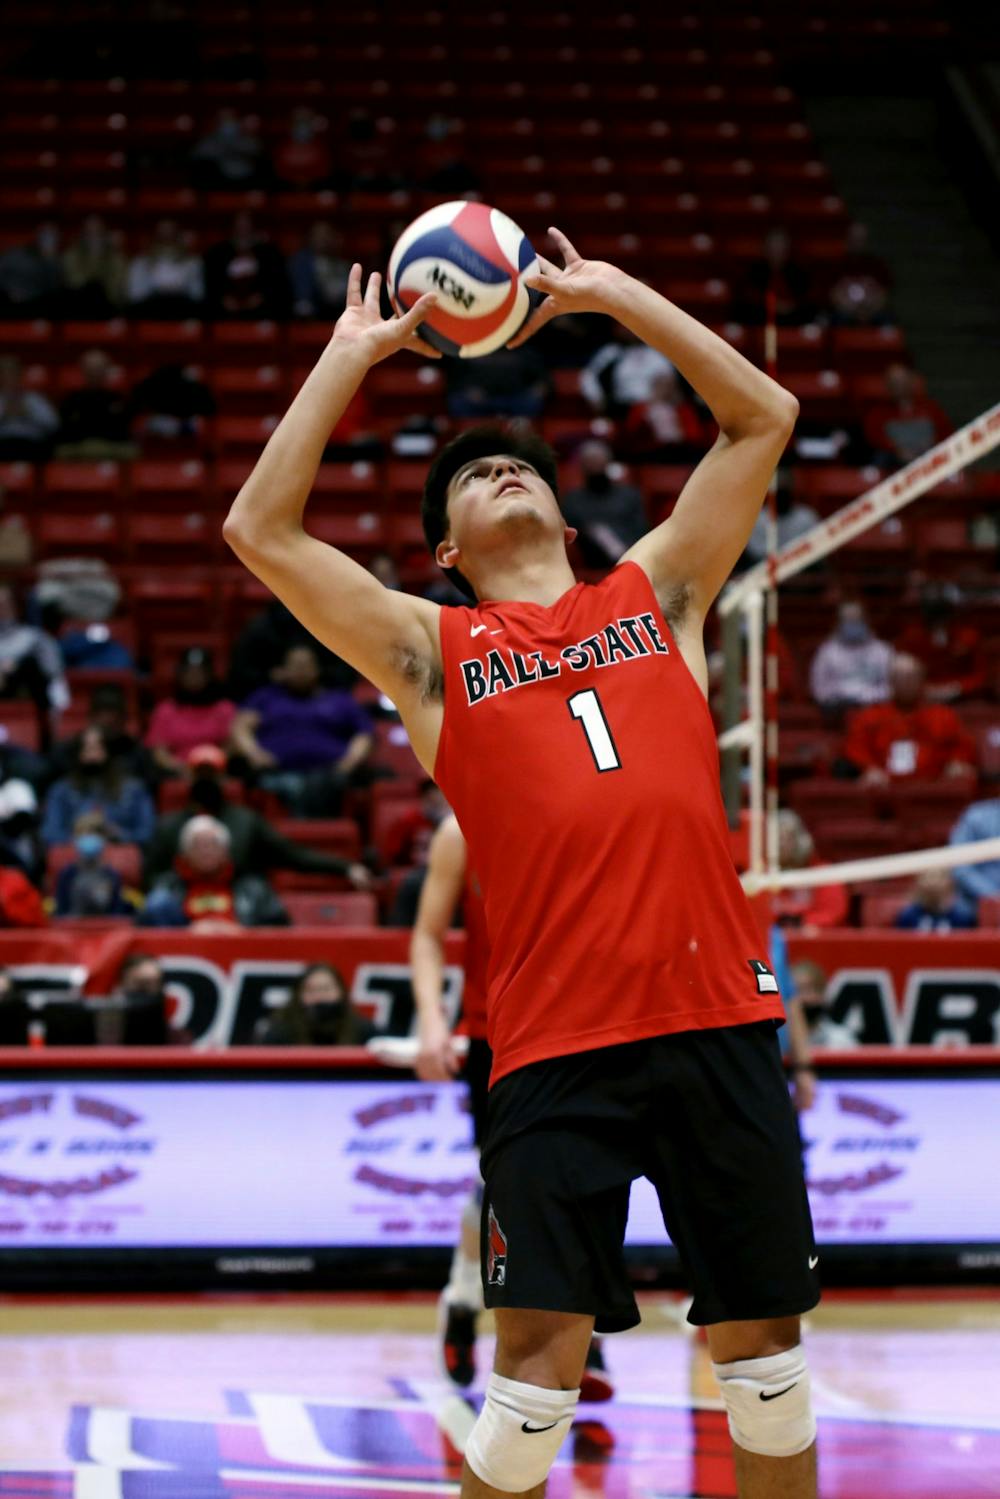 Junior setter David Flores sets the ball to a teammate in a game against Quincy Feb. 25 at Worthen Arena. Flores had 34 assists during the game. Amber Pietz, DN